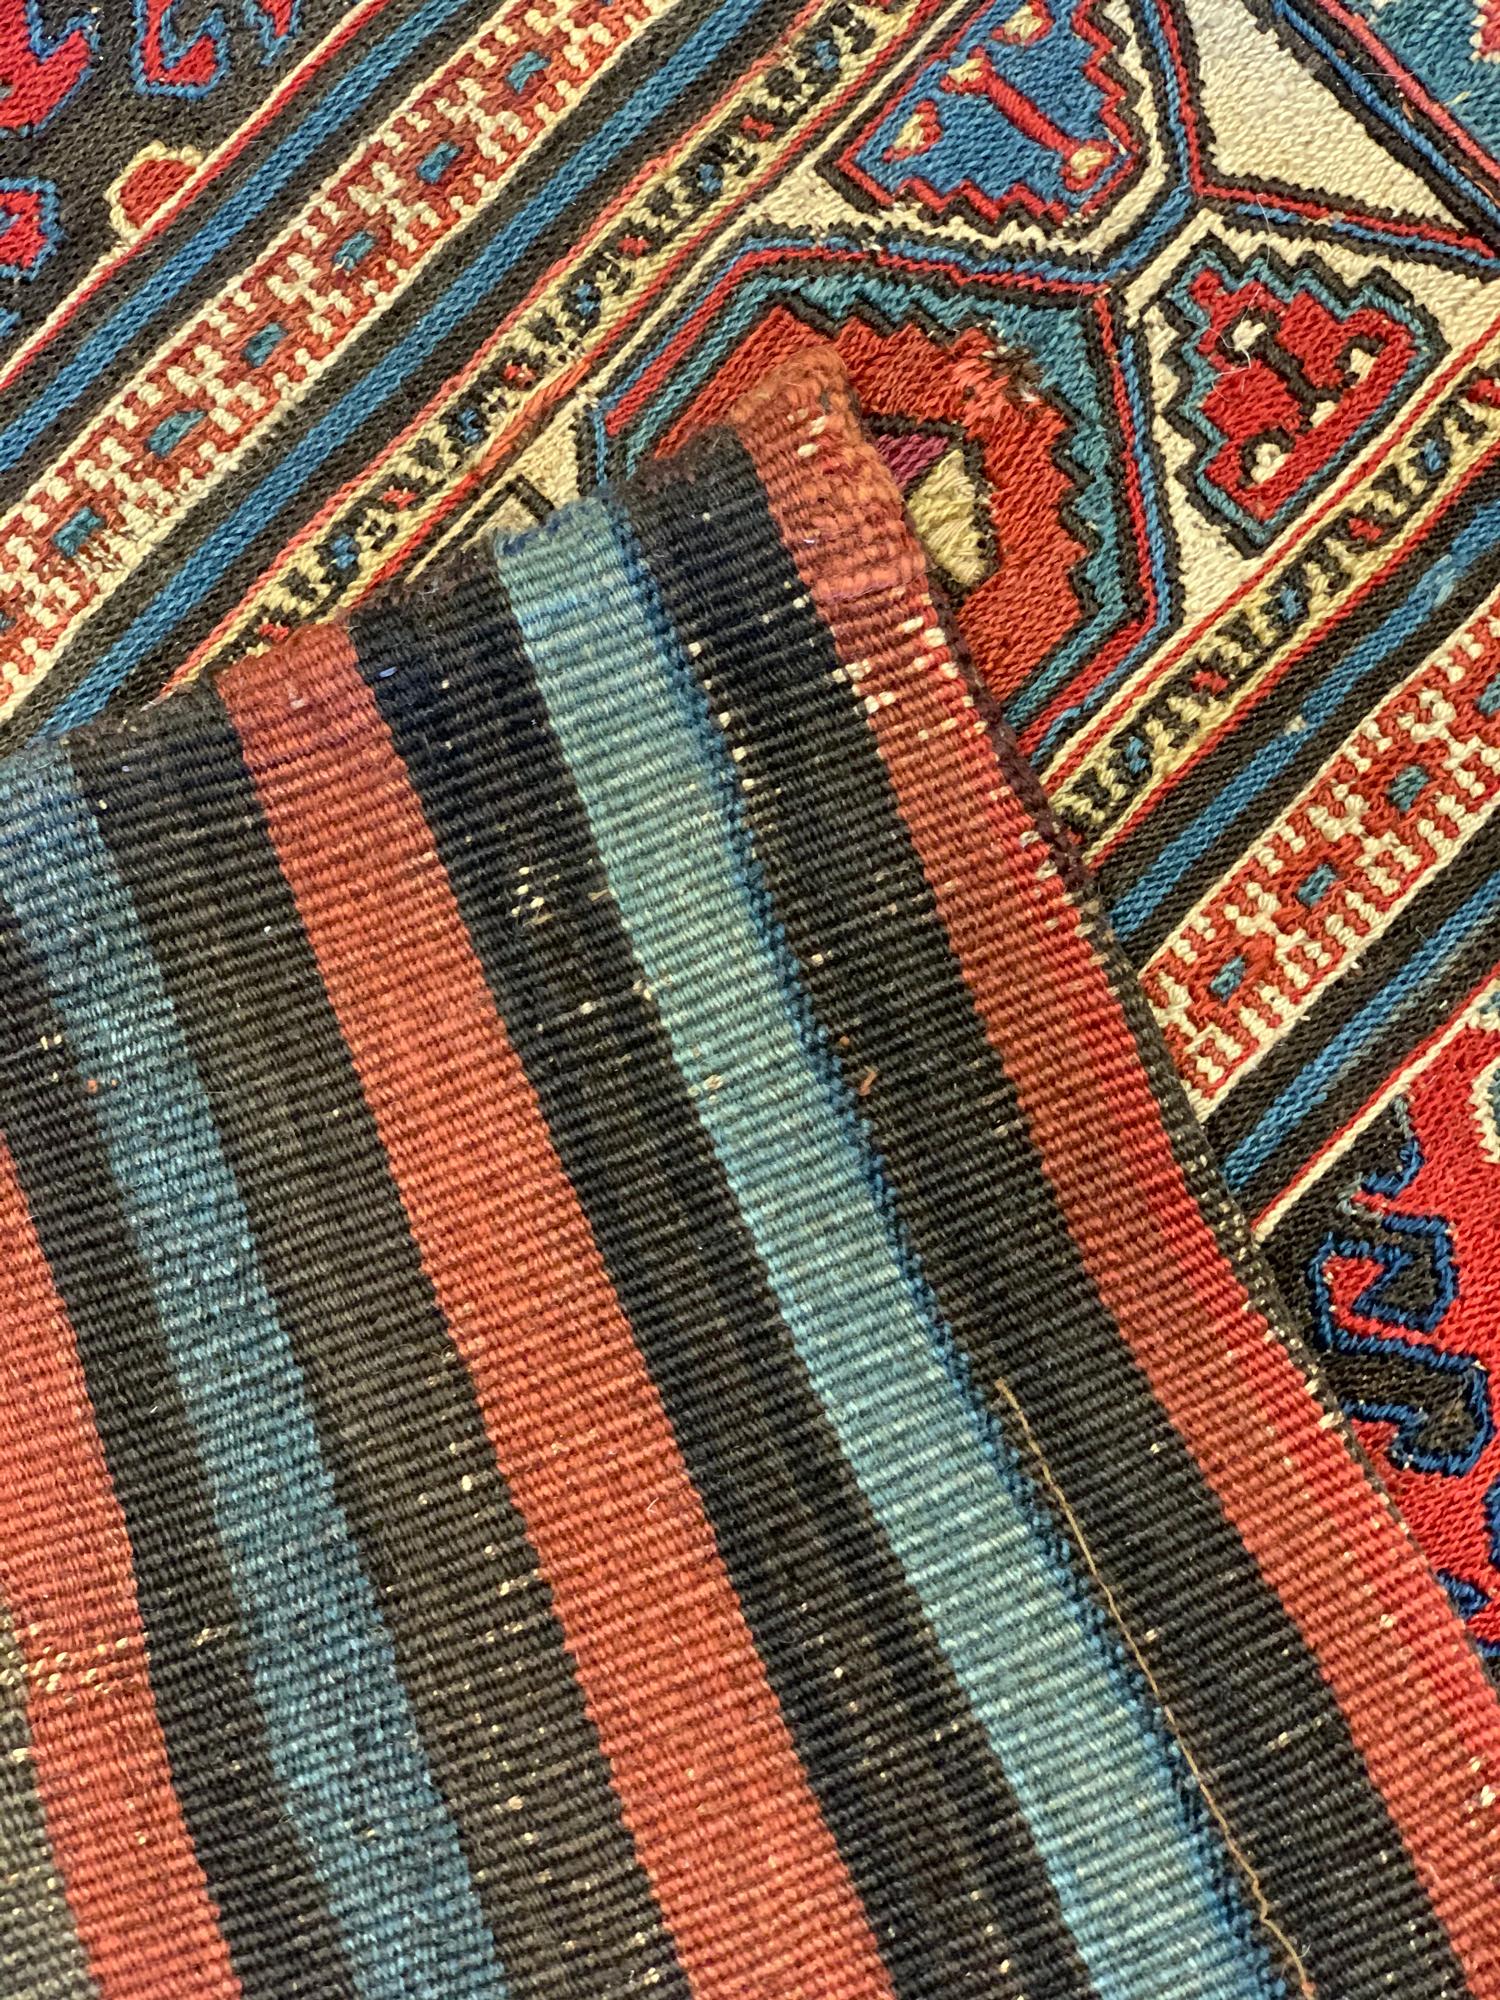 19th Century Pair of Collectible Antique Rugs, Kilims Oriental Caucasian Wool 